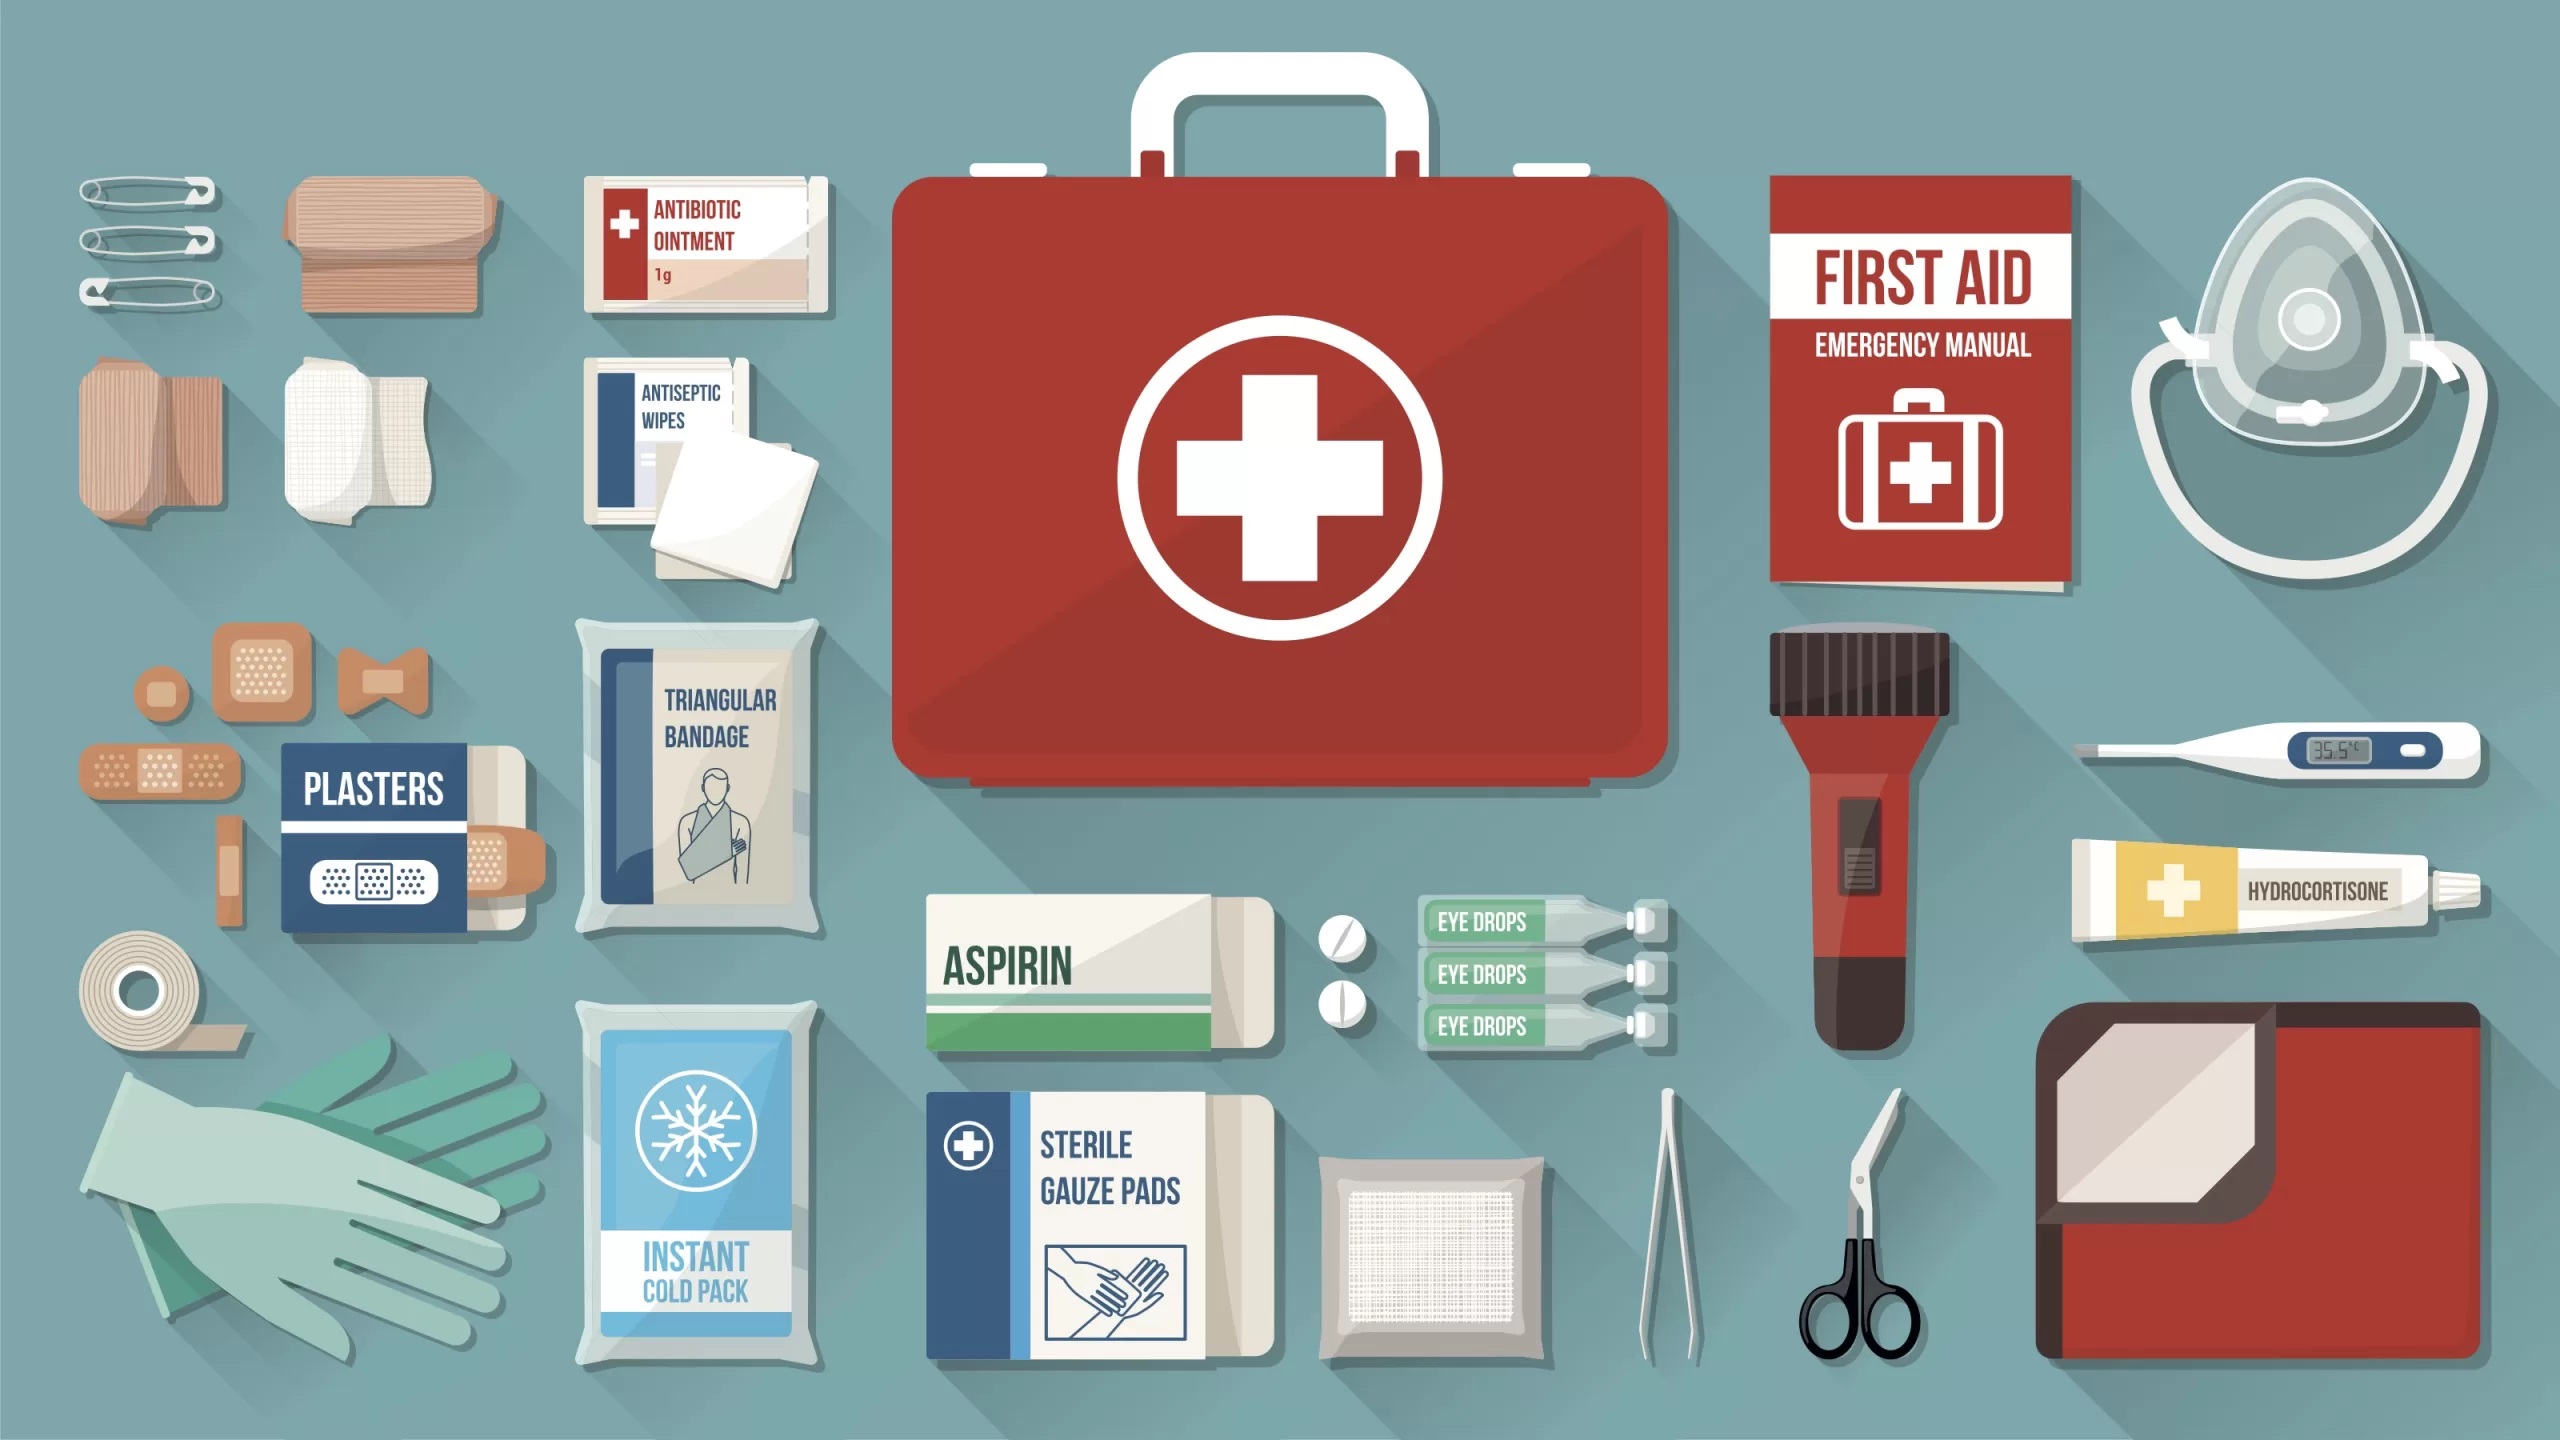 Buy First Aid Box at Best Prices in Uganda. First Aid Kits and Shop at The Best Price from Supplier of Medical Products. We provide a first aid box with plasters in a variety of different sizes and shapes, small, medium, and large sterile gauze dressings, sterile eye dressings, triangular bandages, crêpe rolled bandages, safety pins, disposable sterile gloves, and tweezers. Having a well-stocked first-aid kit in the workplace or at home is the perfect way to deal with injuries at a moment's notice.